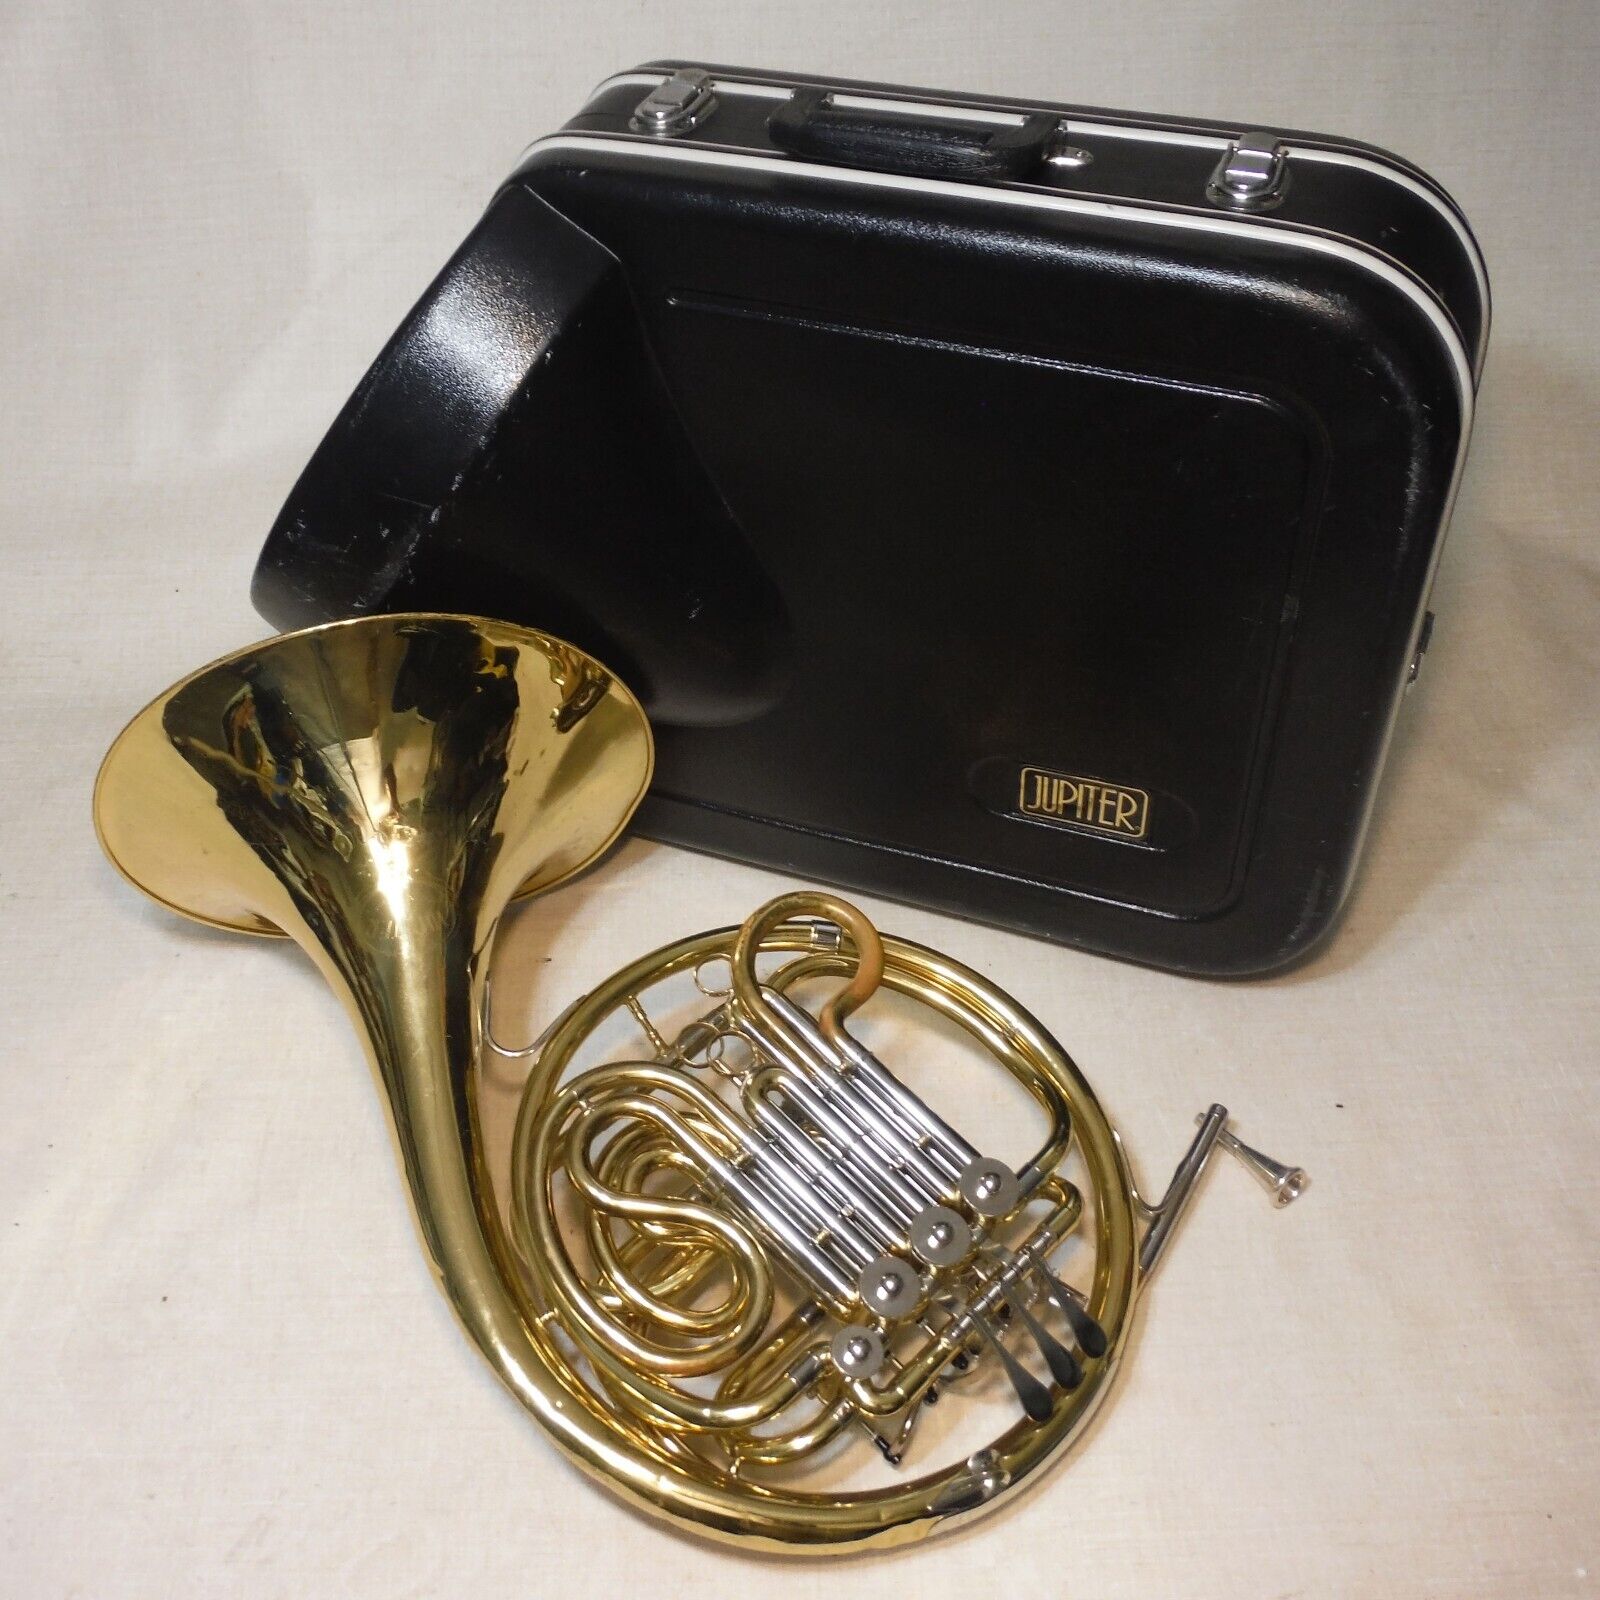 JUPITER JHR-852 DOUBLE FRENCH HORN BRASS WORKING GOOD W/DENTS CASE MOUTHPIECE 1